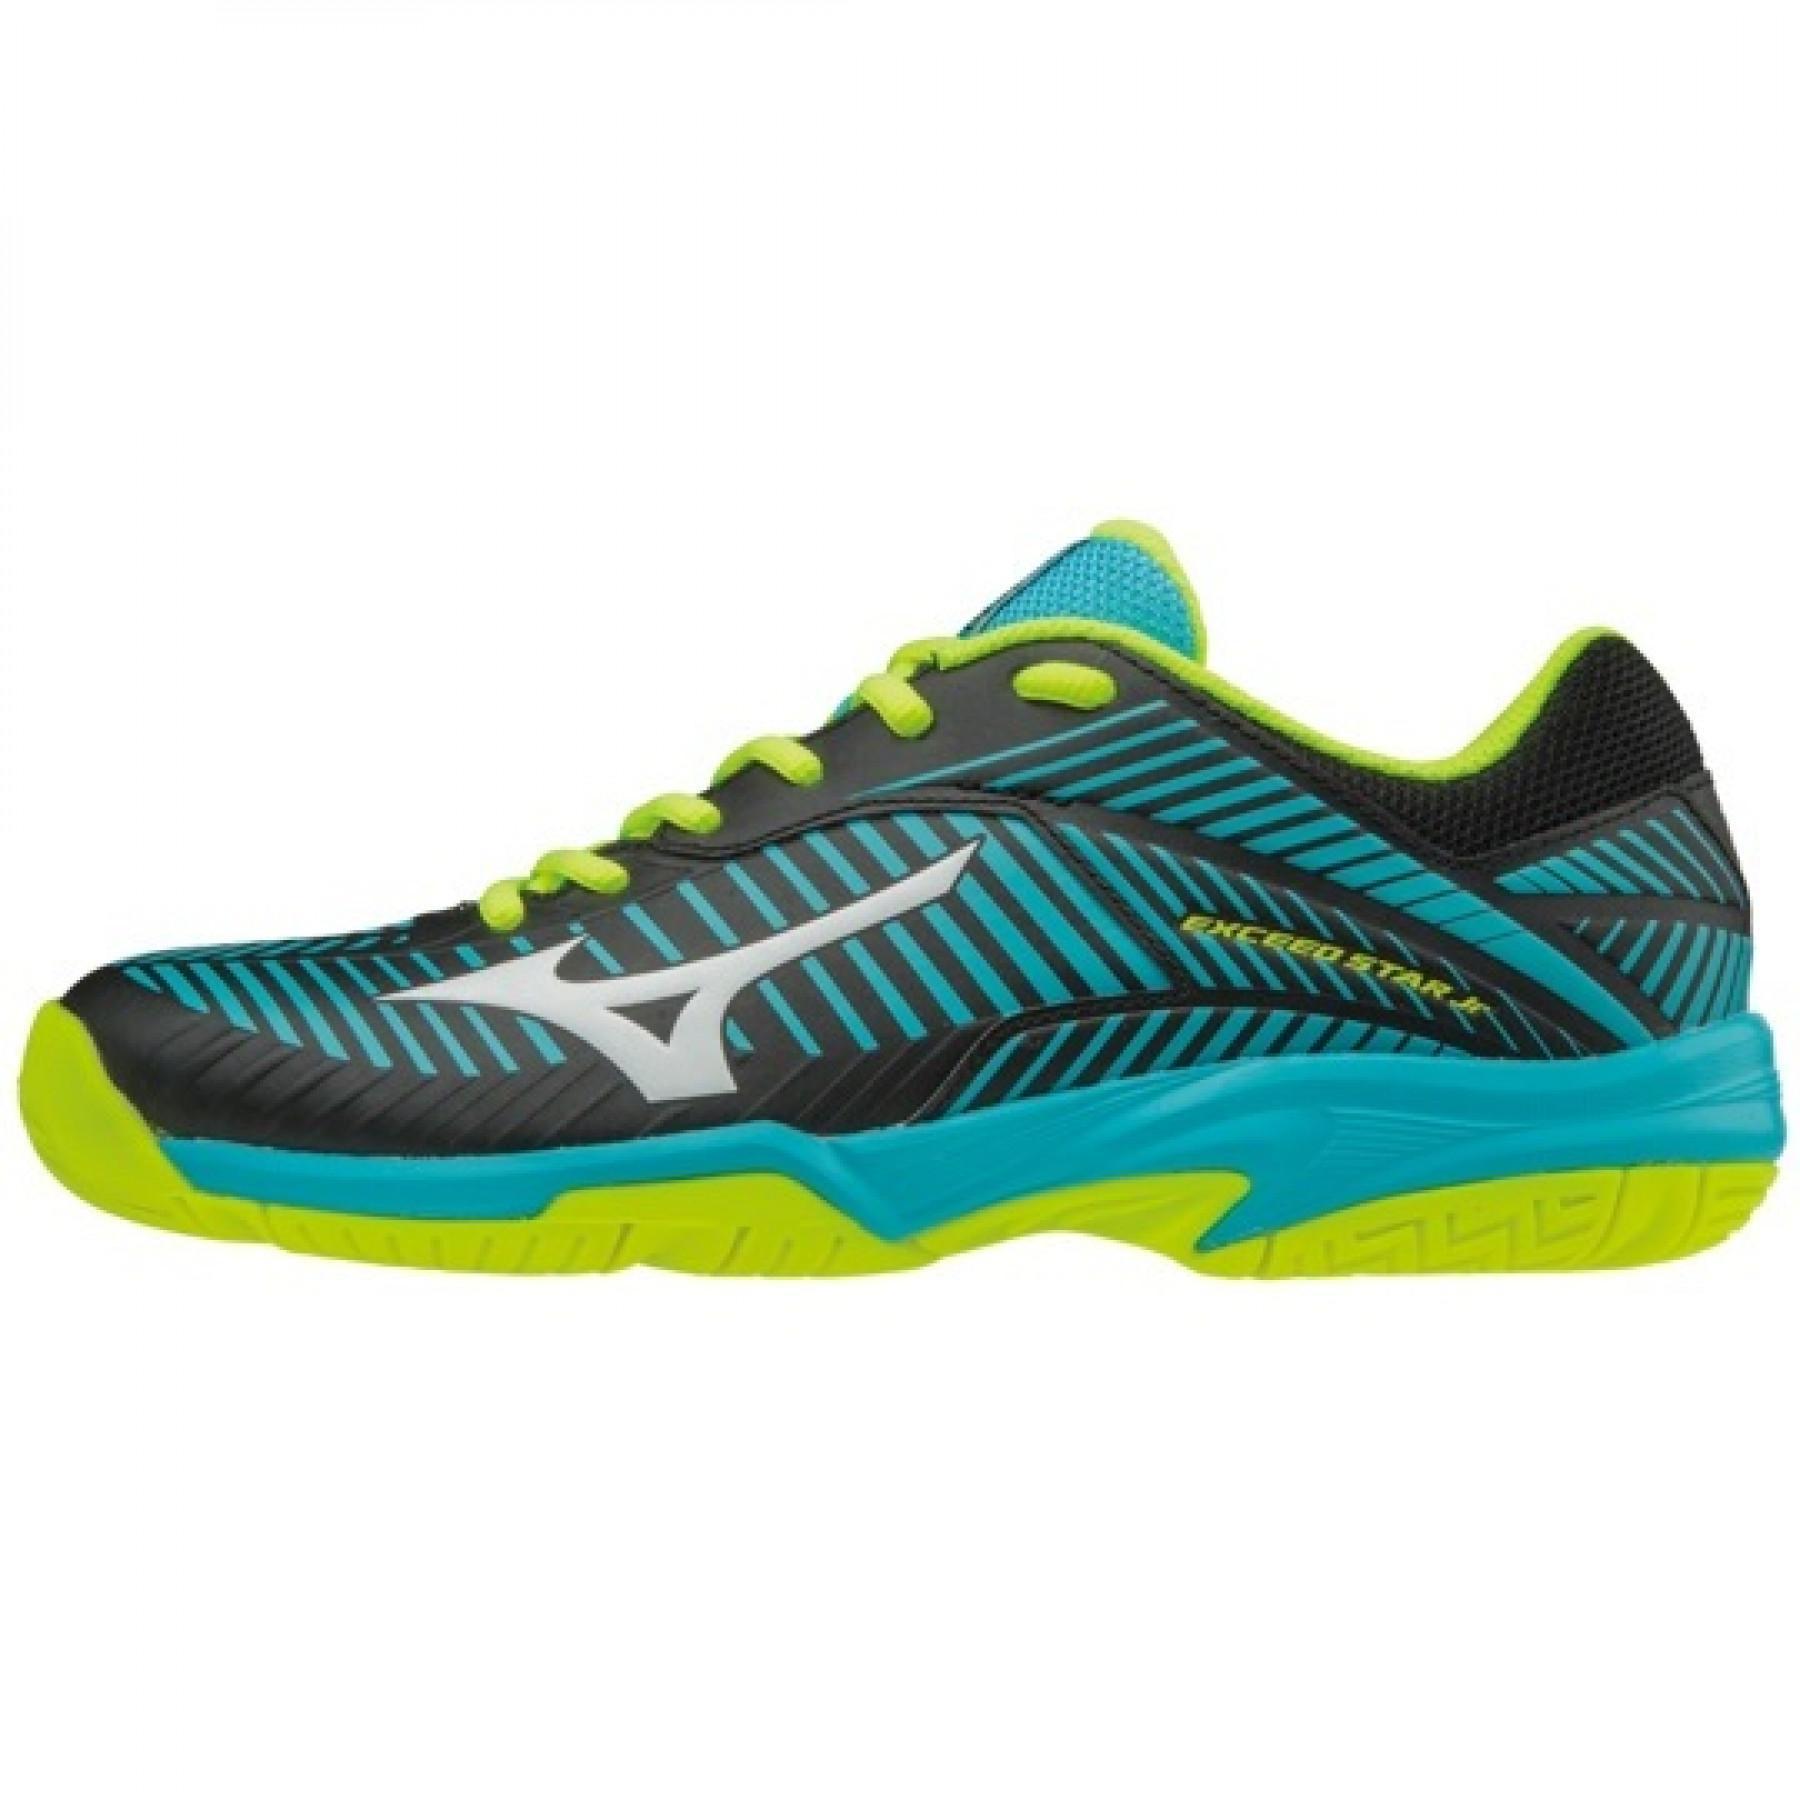 Chaussures Mizuno Exceed Star JR 2